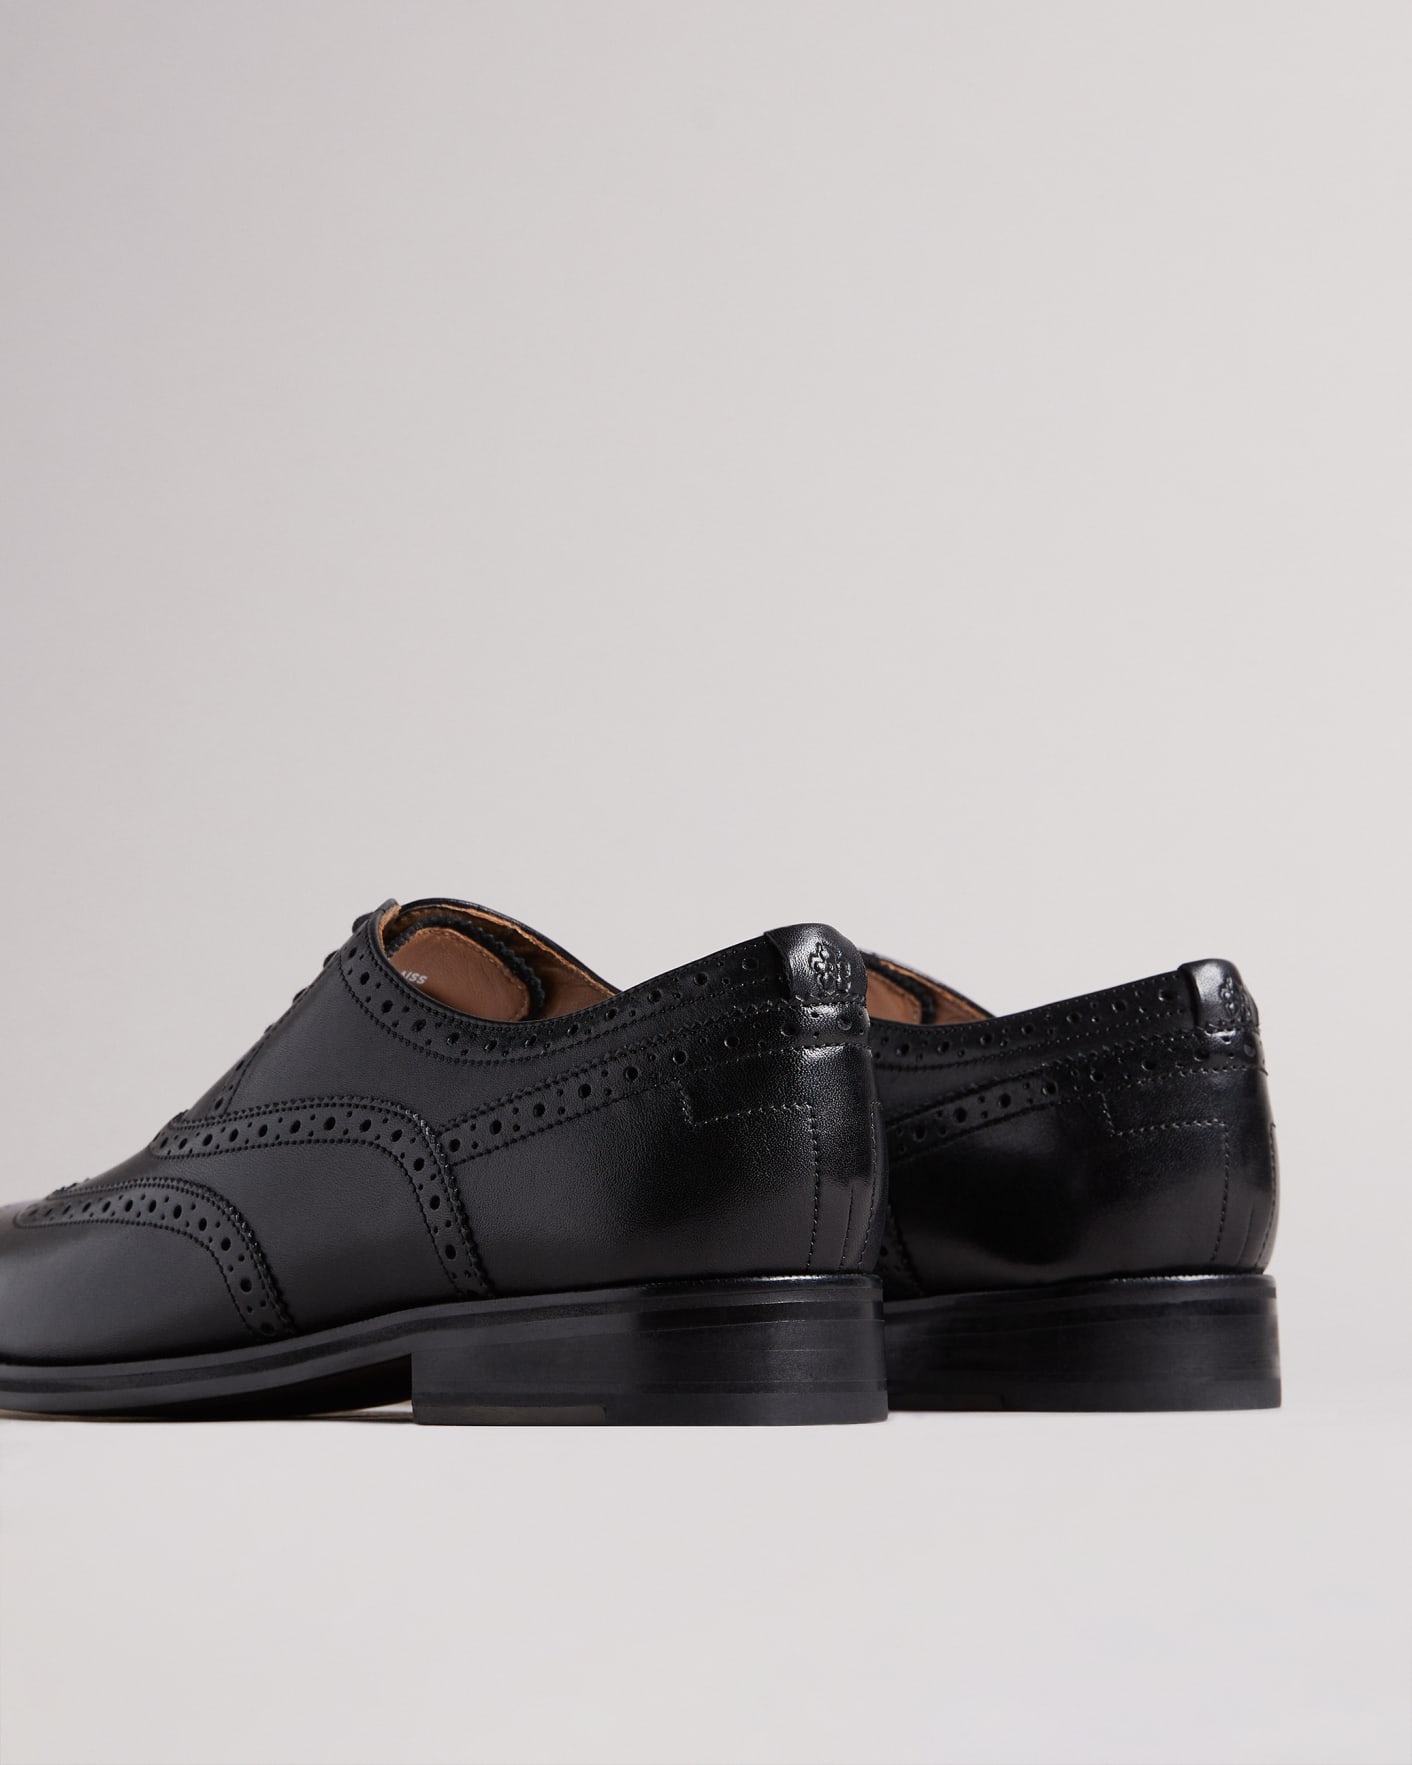 Mens Shoes Lace-ups Brogues Ted Baker Leather Amaiss Brogues Shoes in Black for Men 